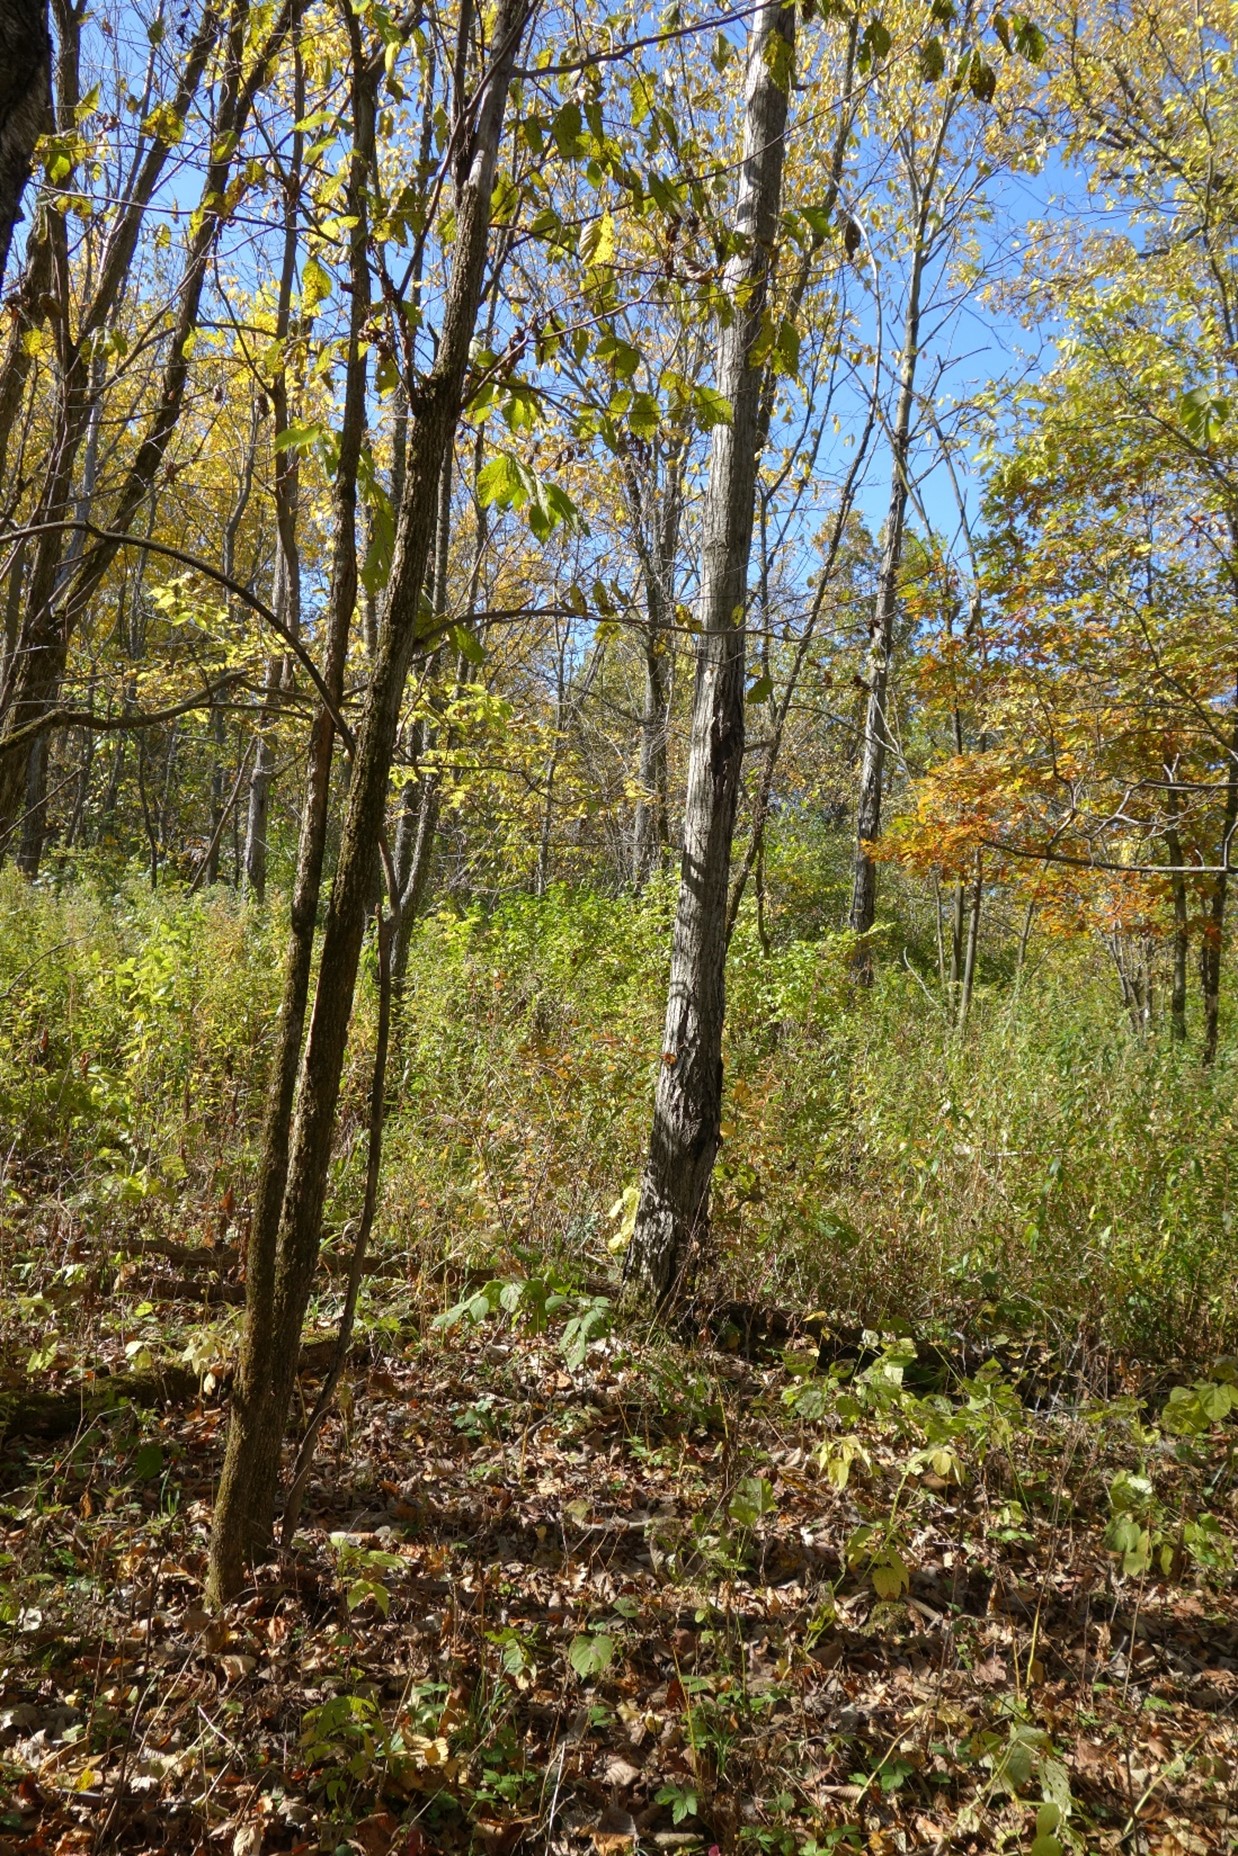 A portion of the stand with some butternut stems in the clearcut with reserves area in October 2020